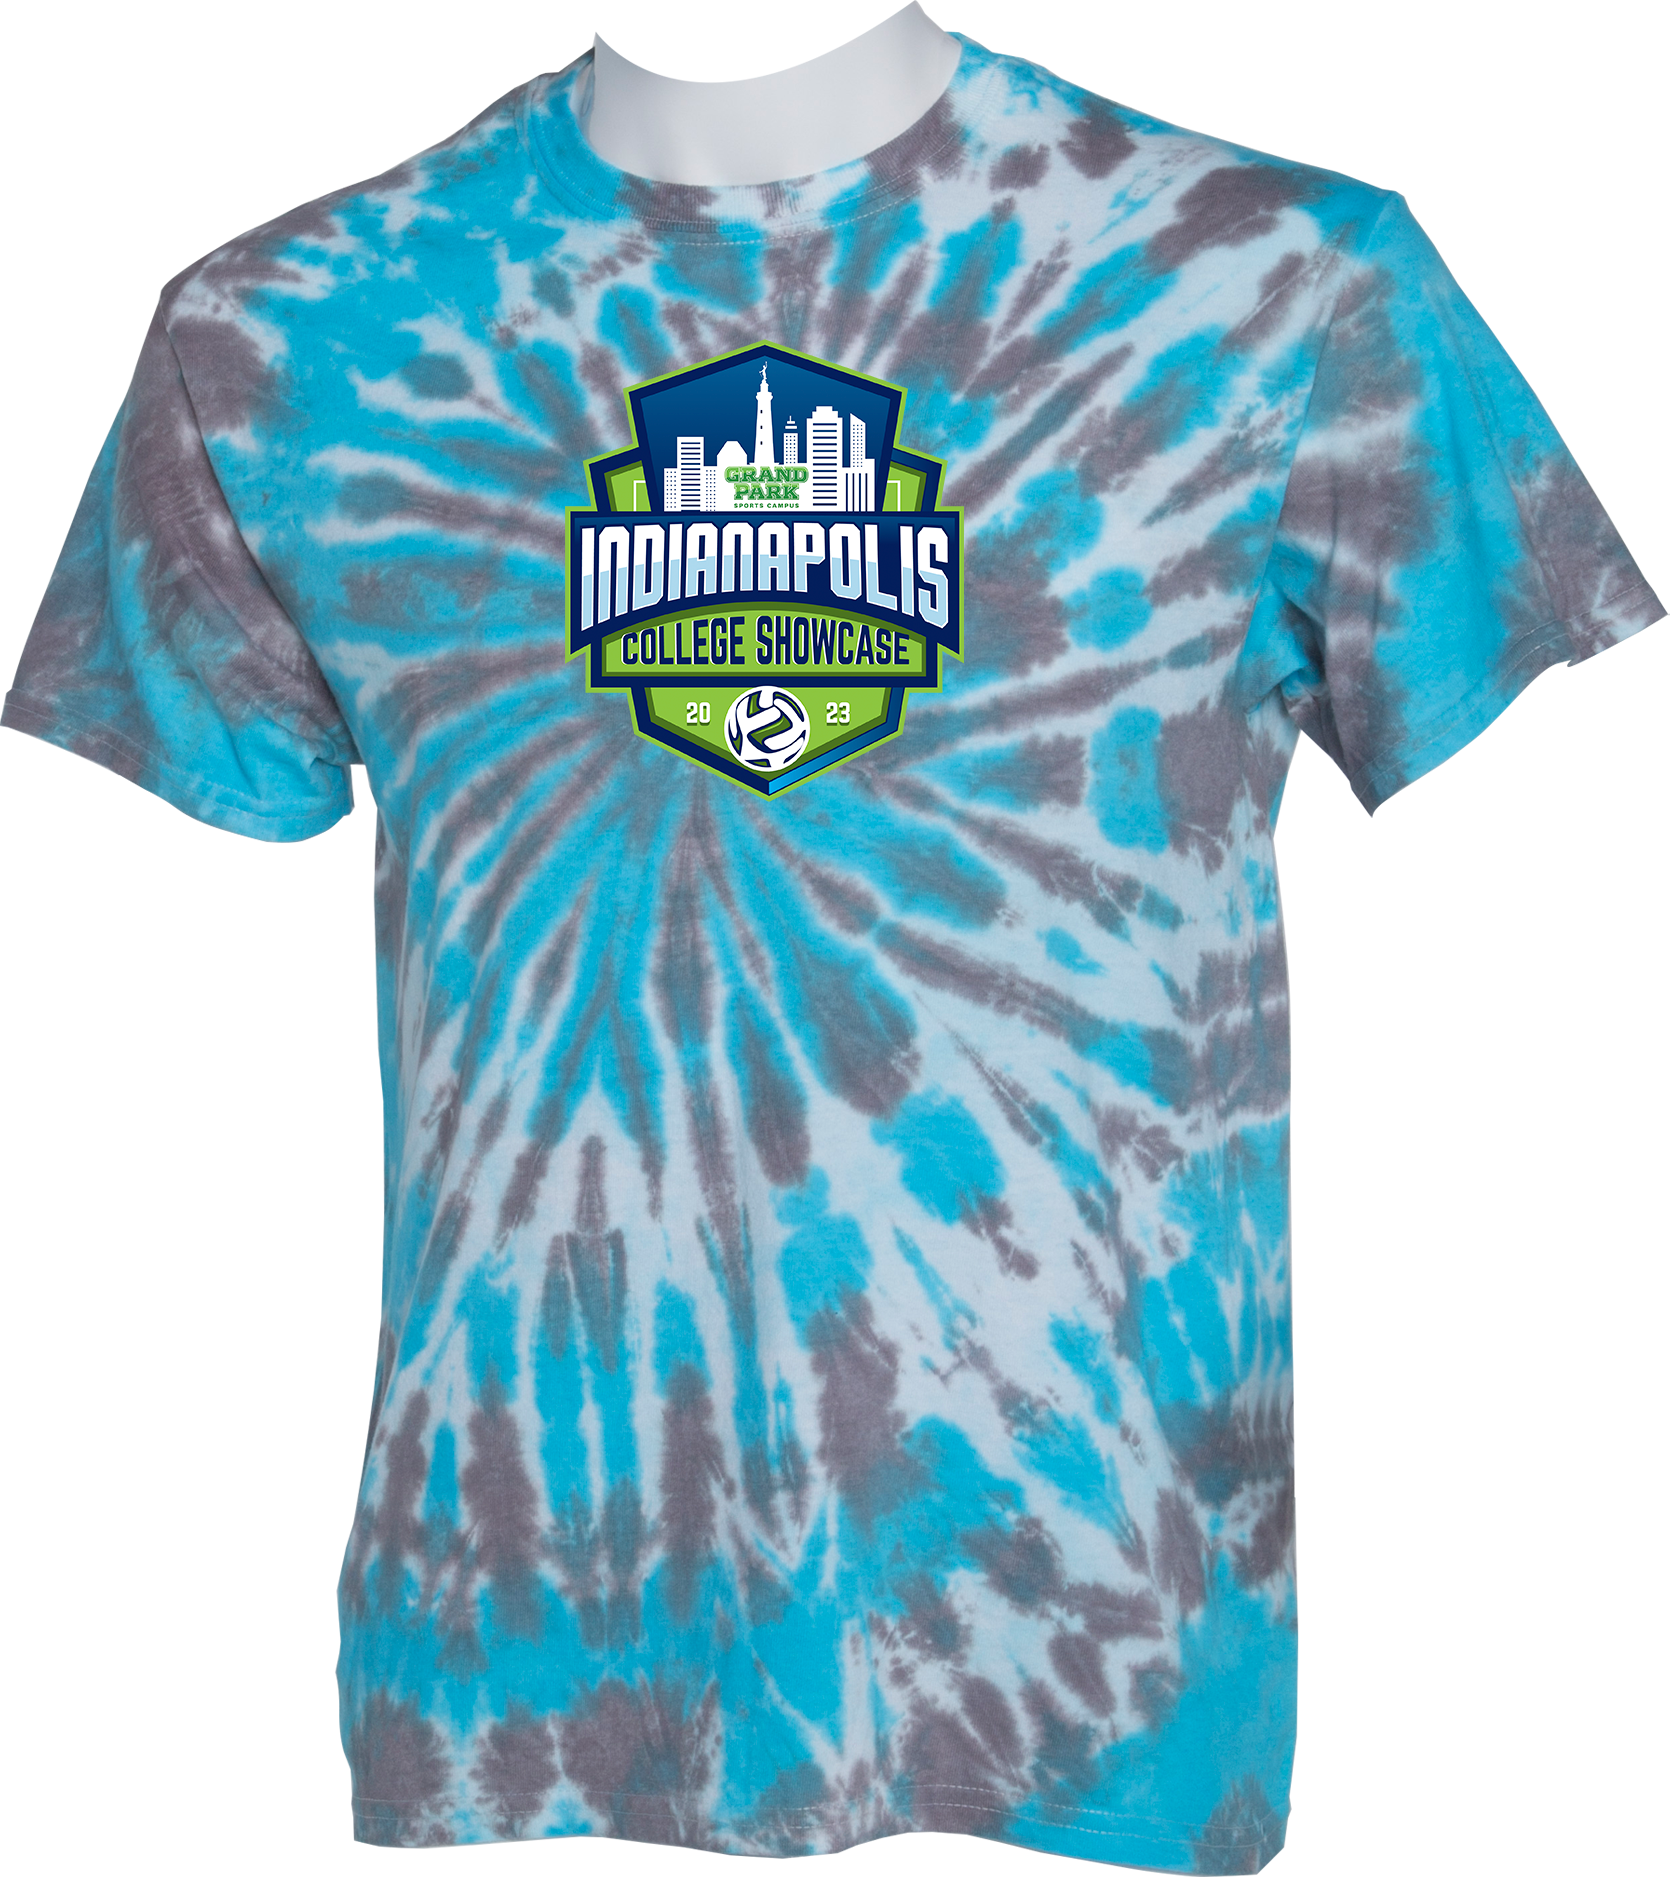 TIE-DYE SHORT SLEEVES - 2023 Indianapolis College Showcase